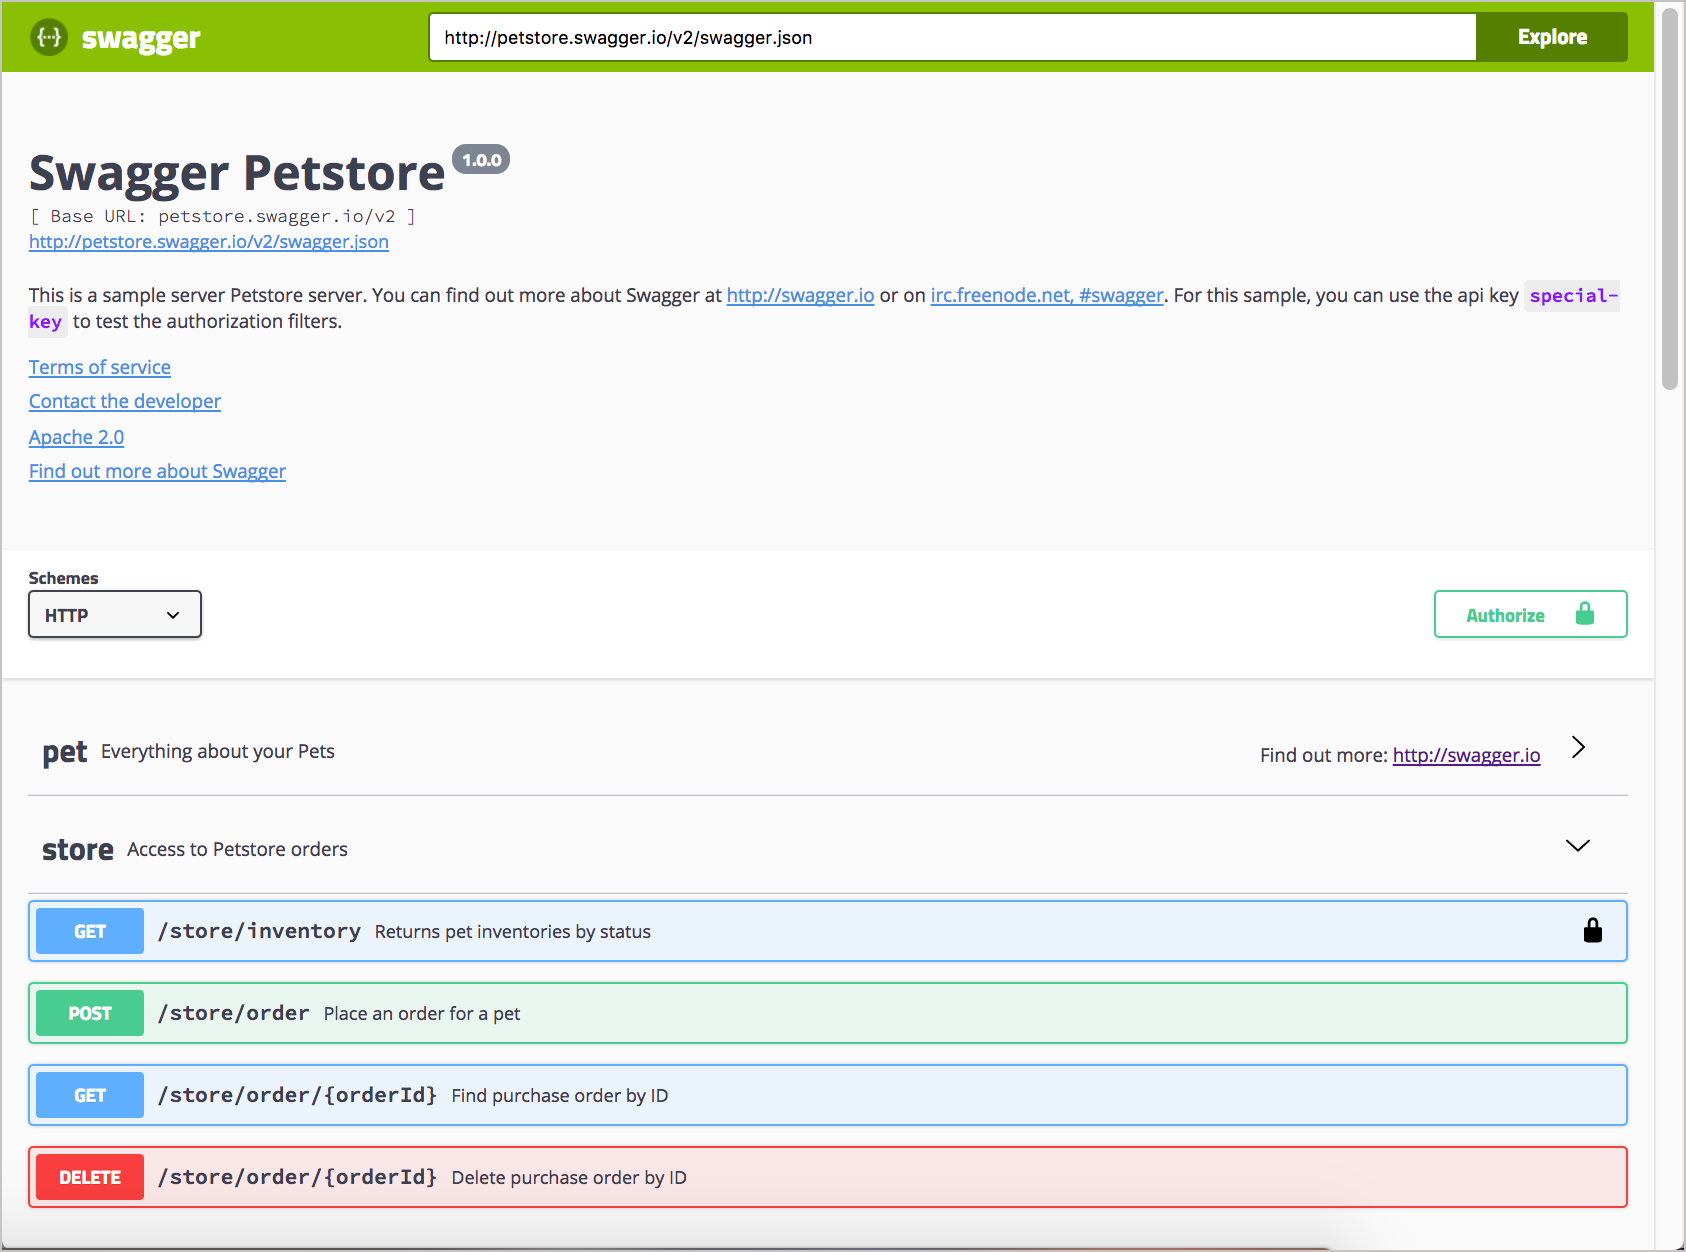 The Swagger Petstore demo shows how Swagger UI renders the OpenAPI spec